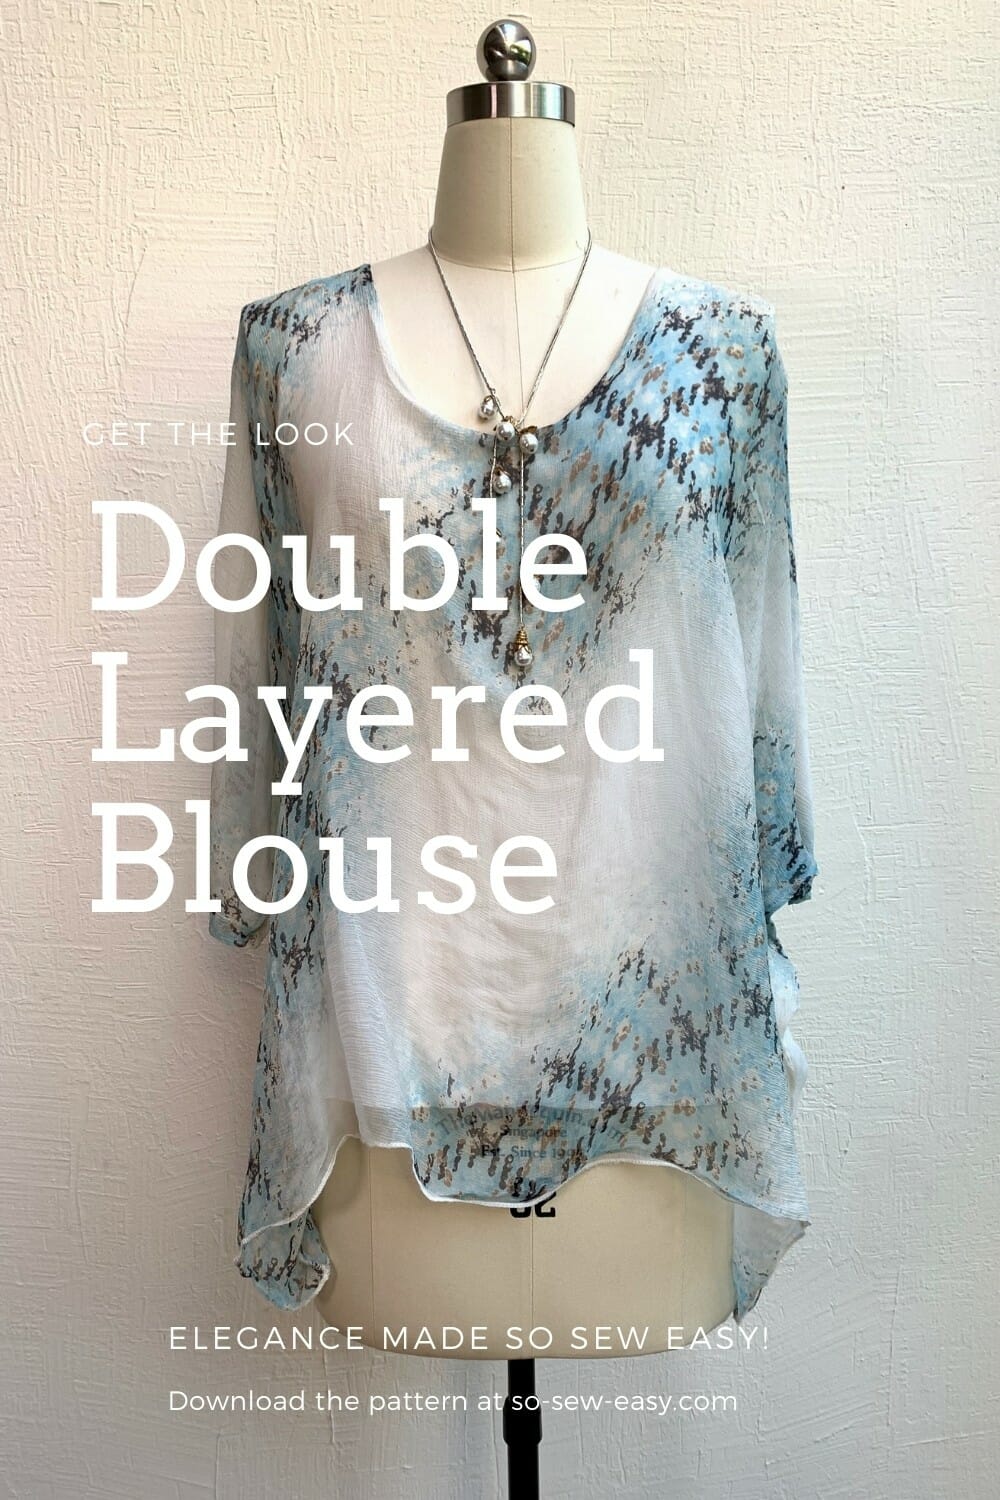 doubled layered blouse